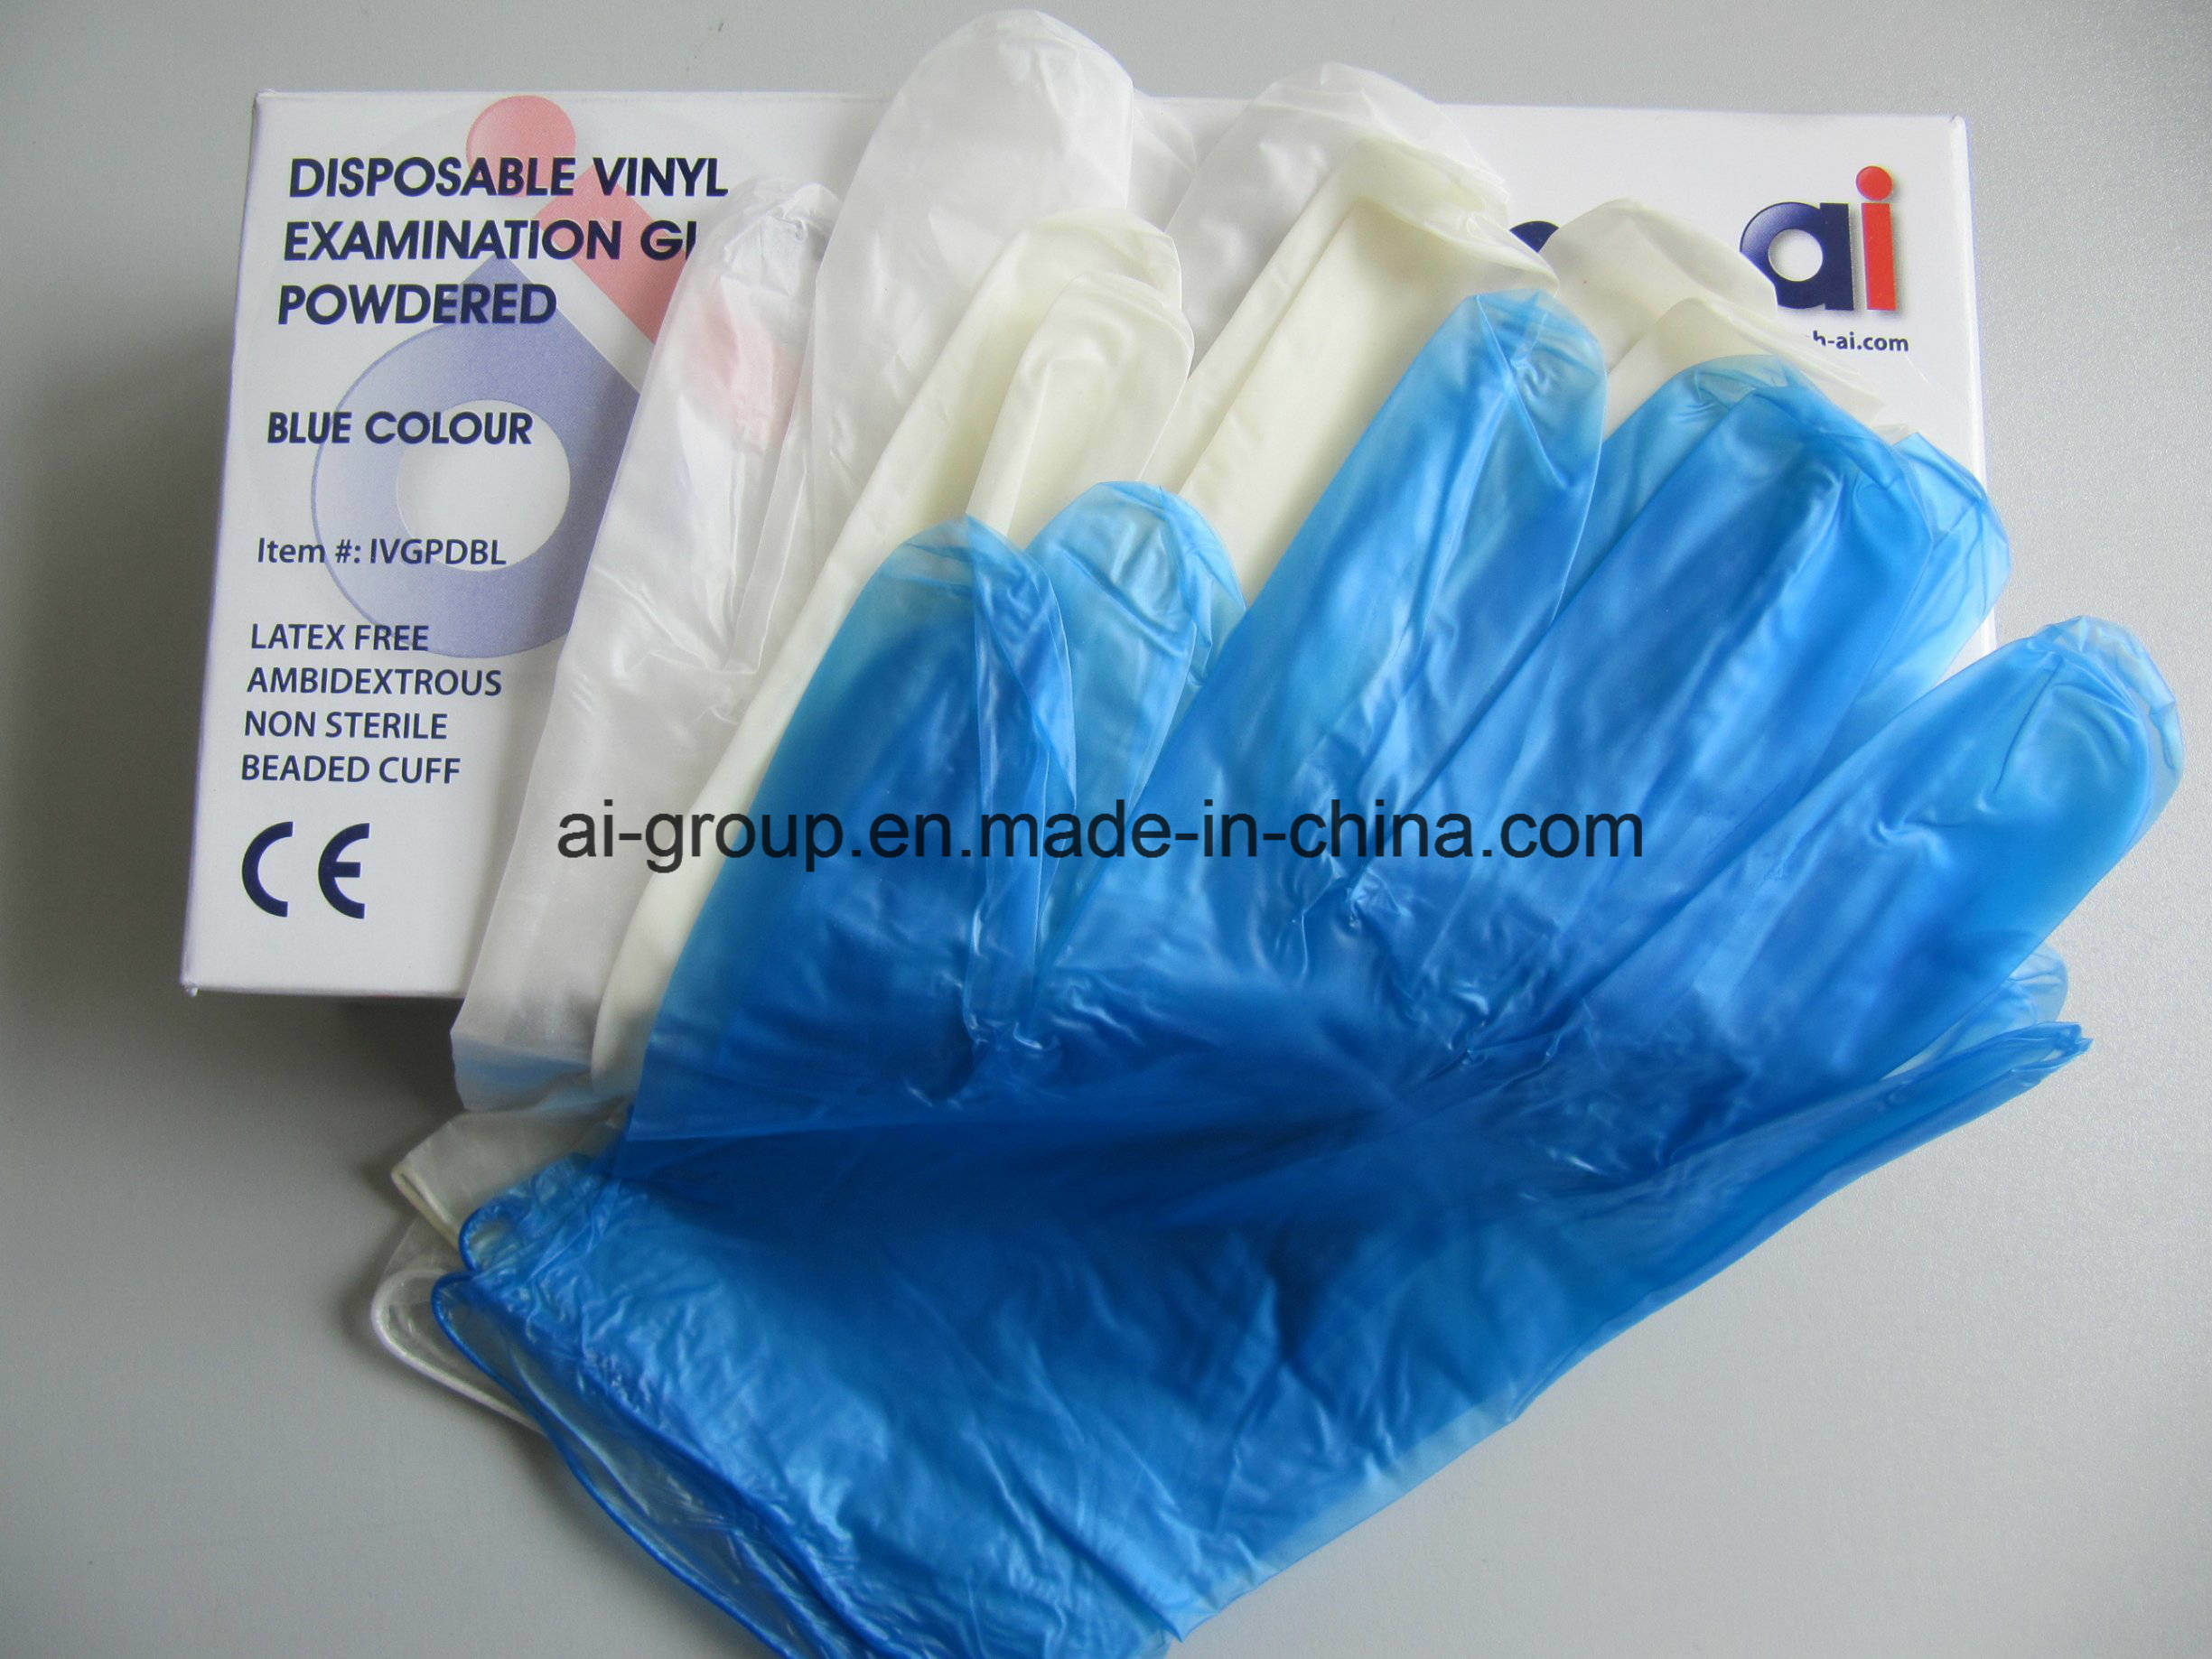 Disposable Food Grade Powder Vinyl Gloves for Cleaning